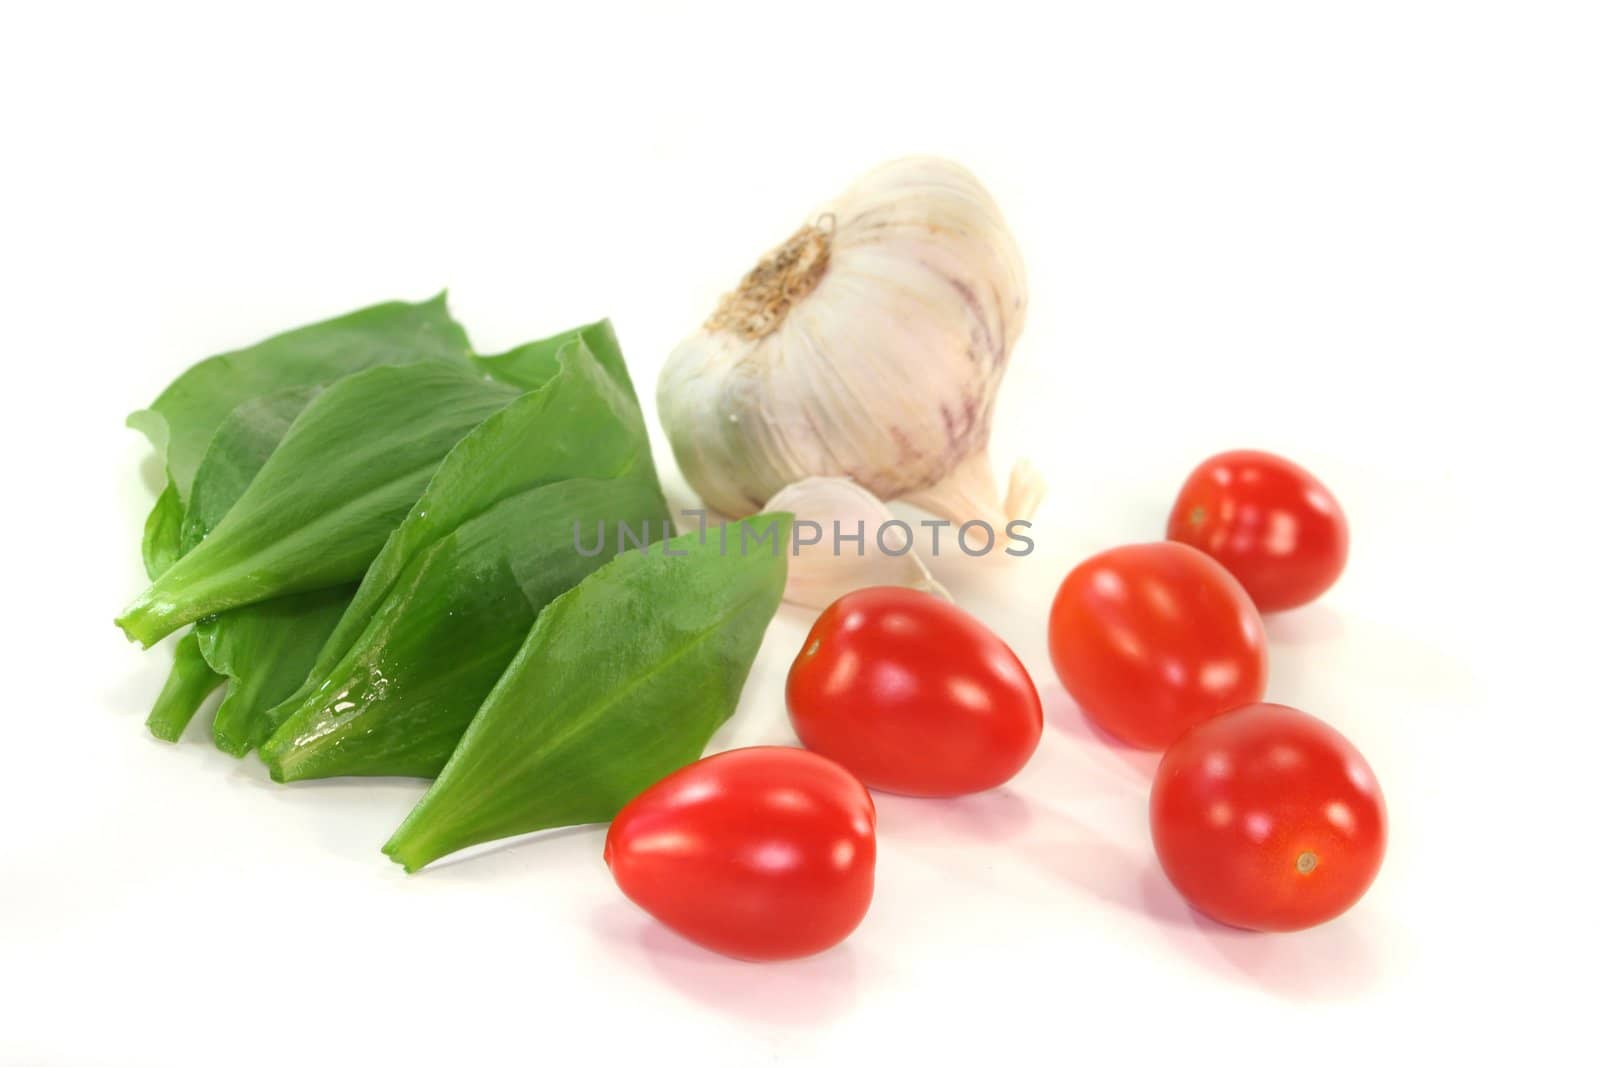 Wild garlic with tomatoes and garlic by discovery